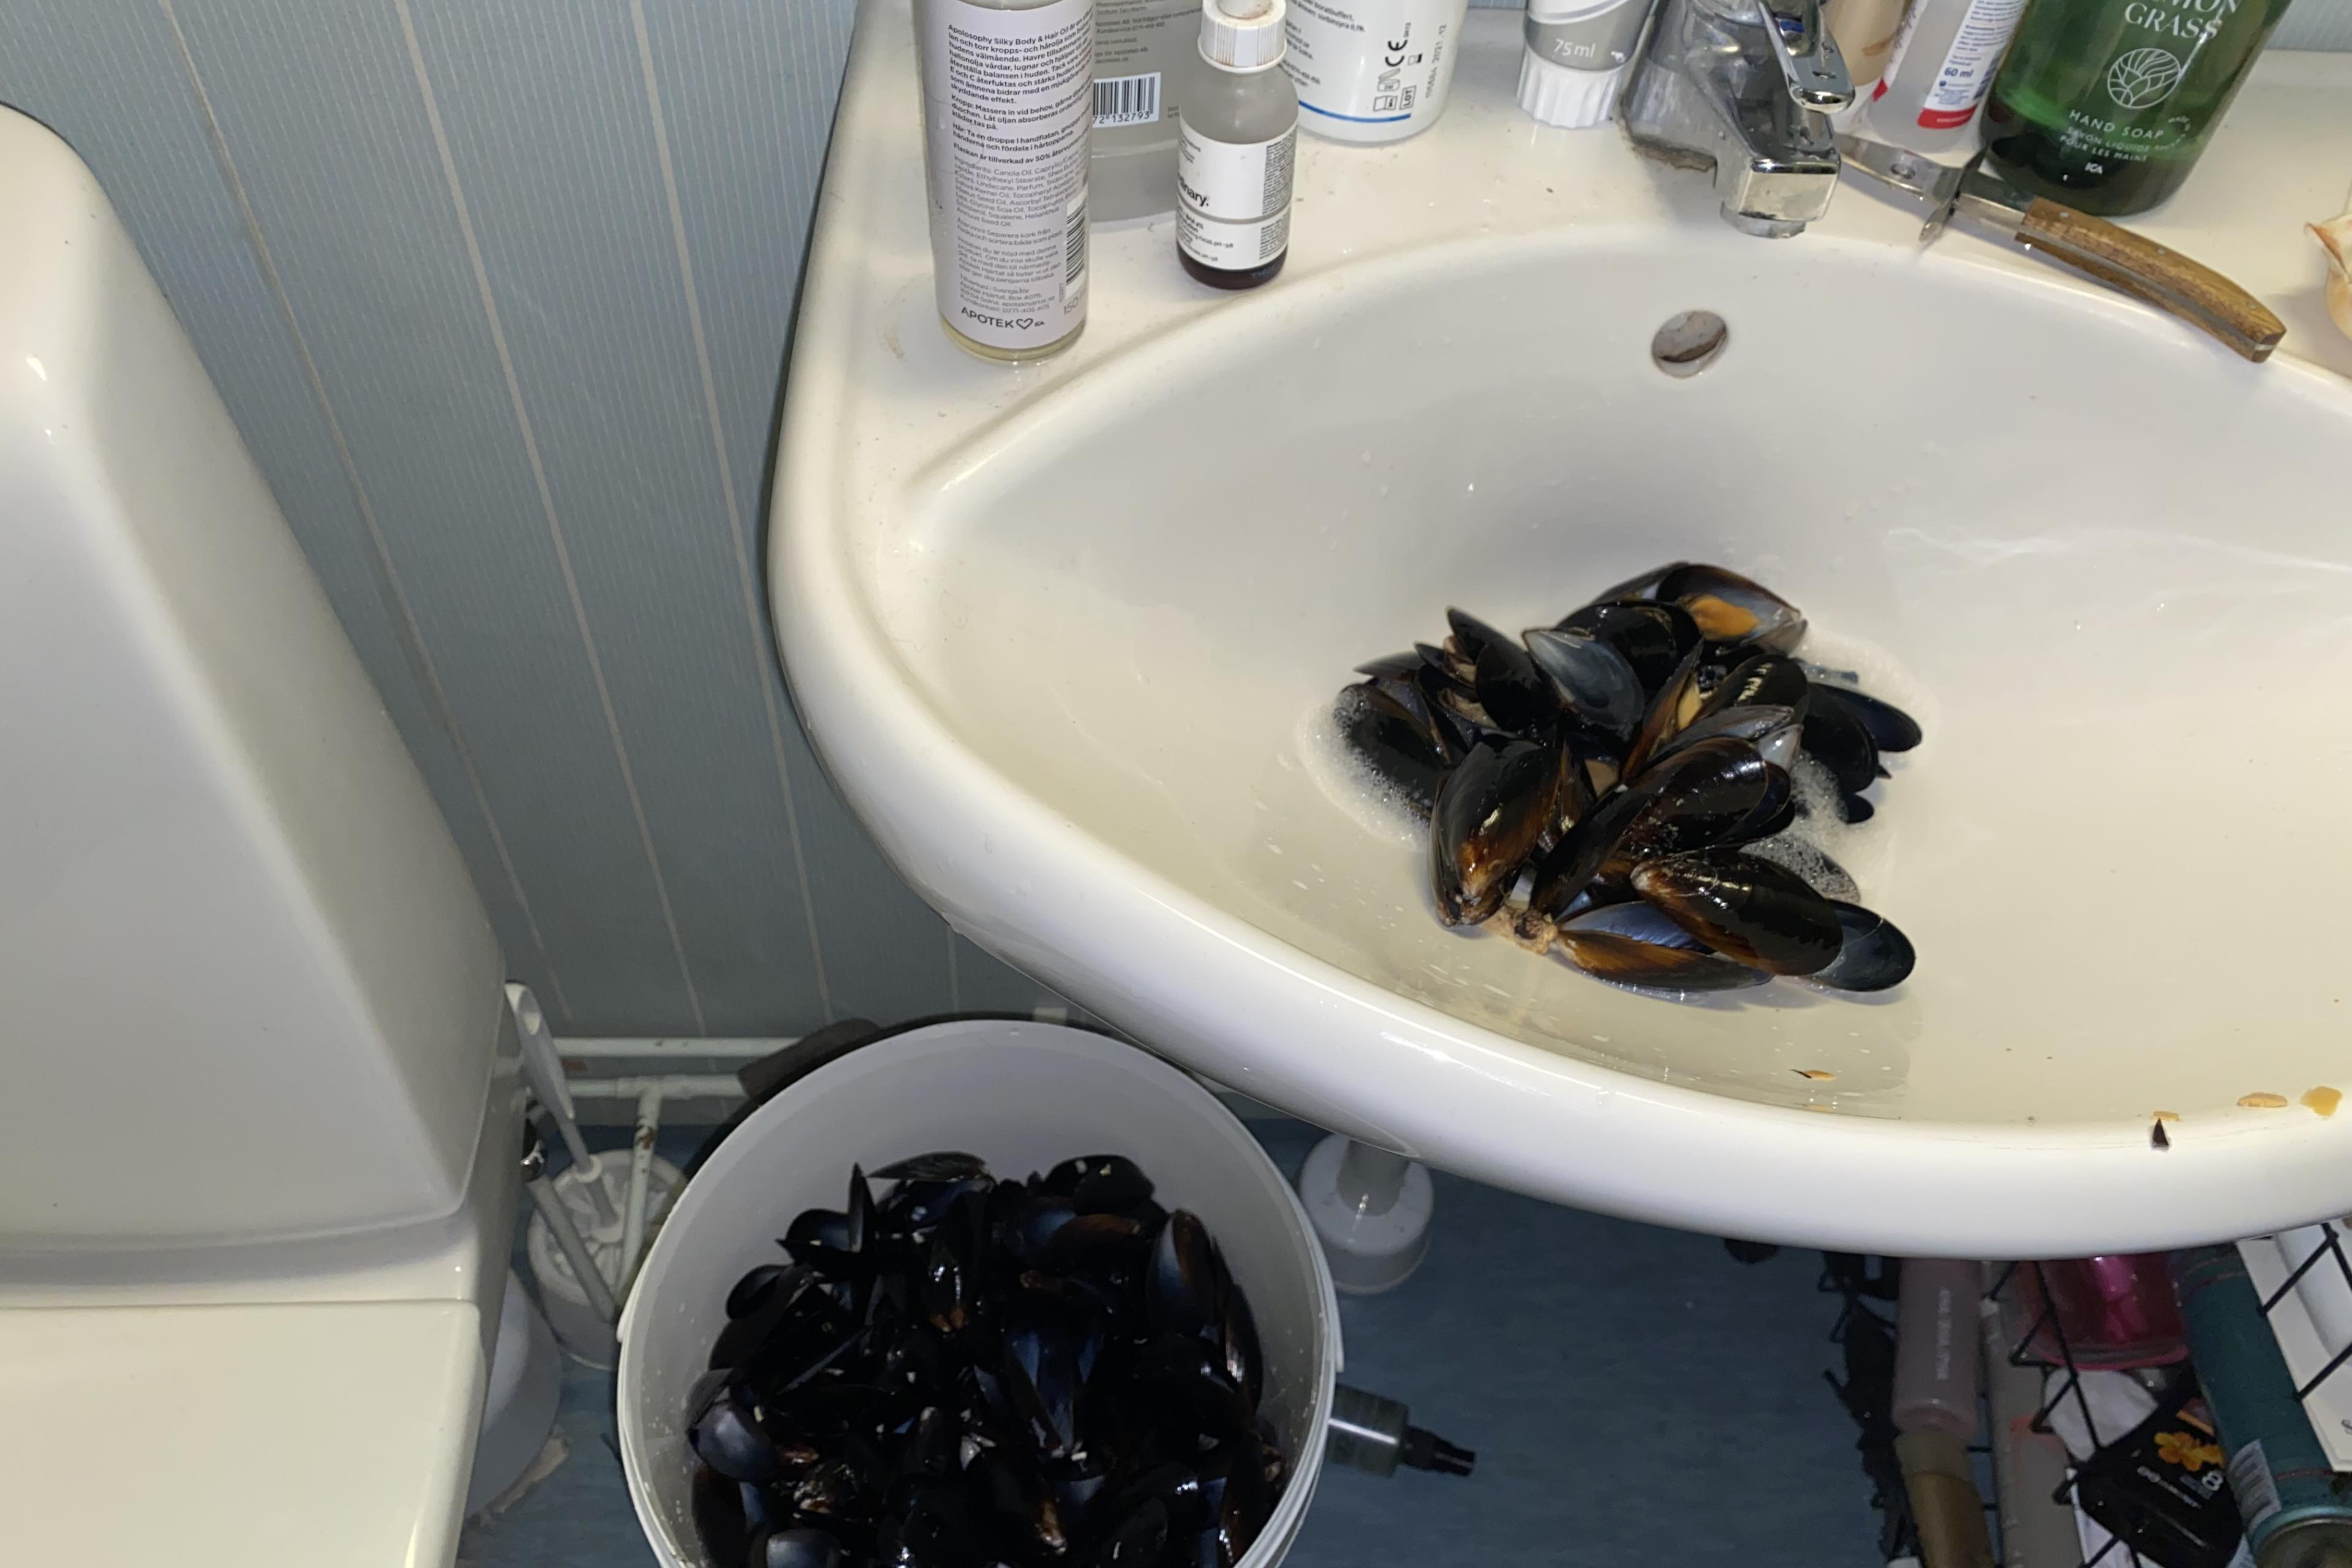 Blue mussel shells in the sink of a bathroom. Next to it there is another bucket of mussels.